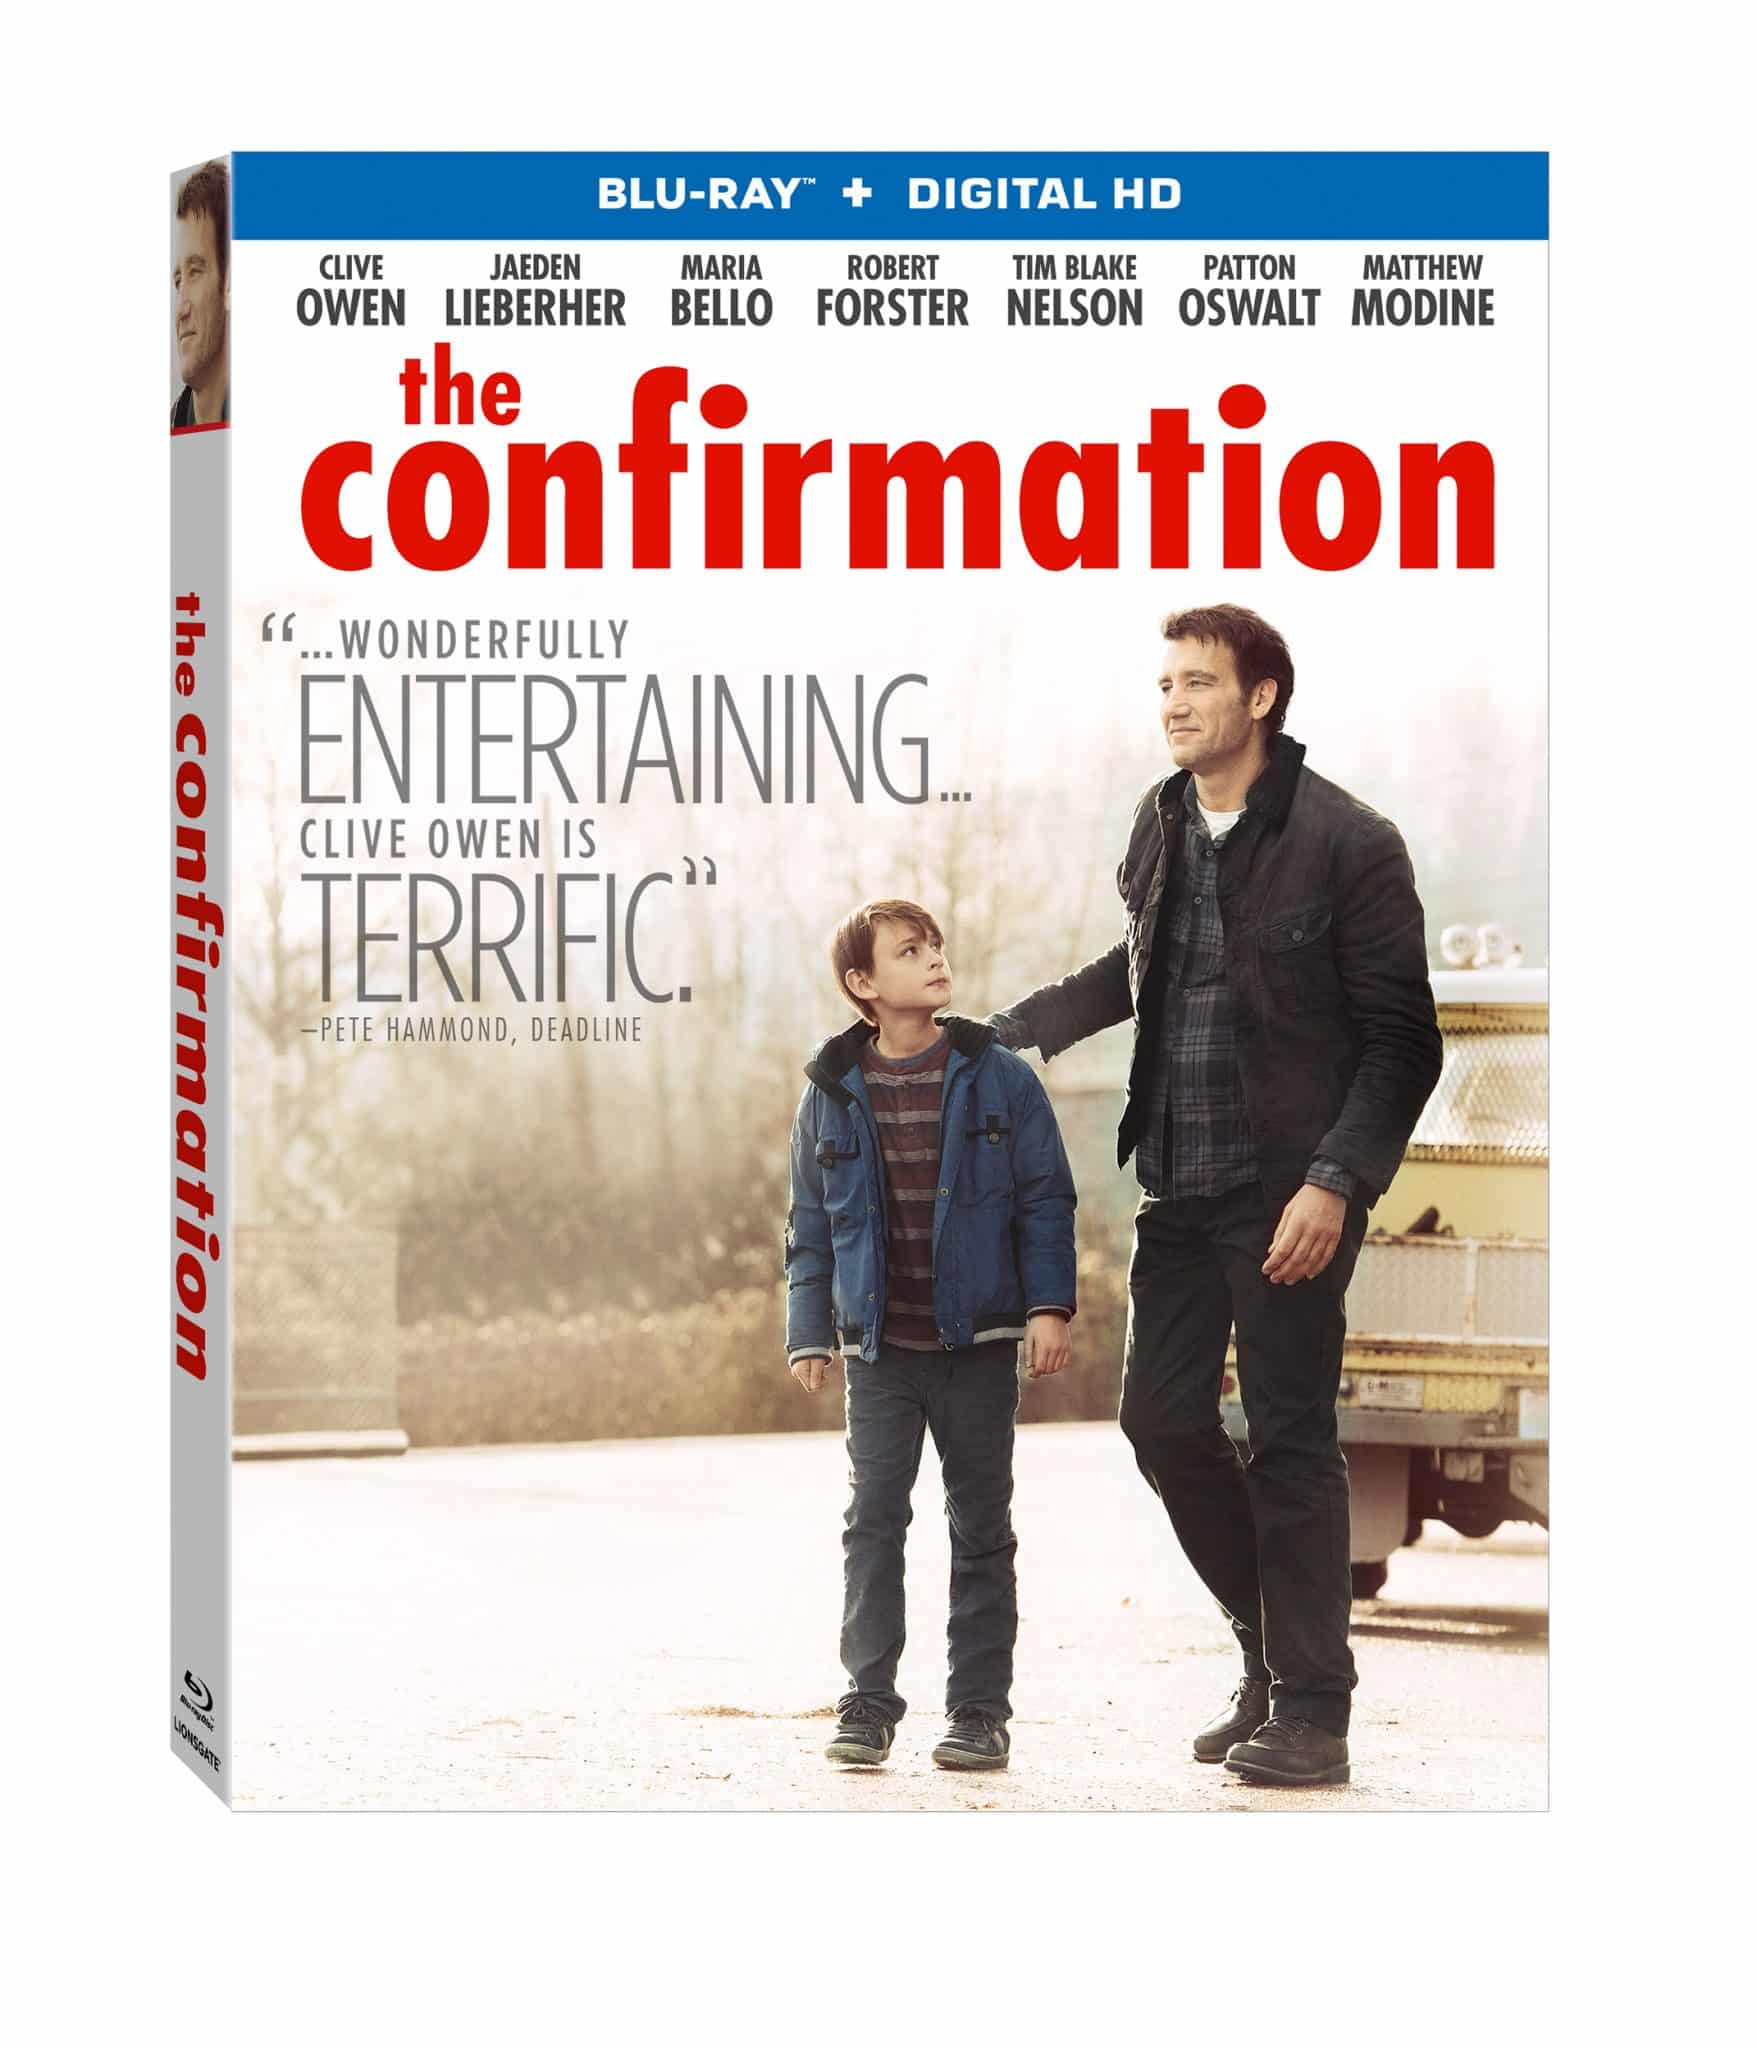 The Confirmation starring Clive Owen